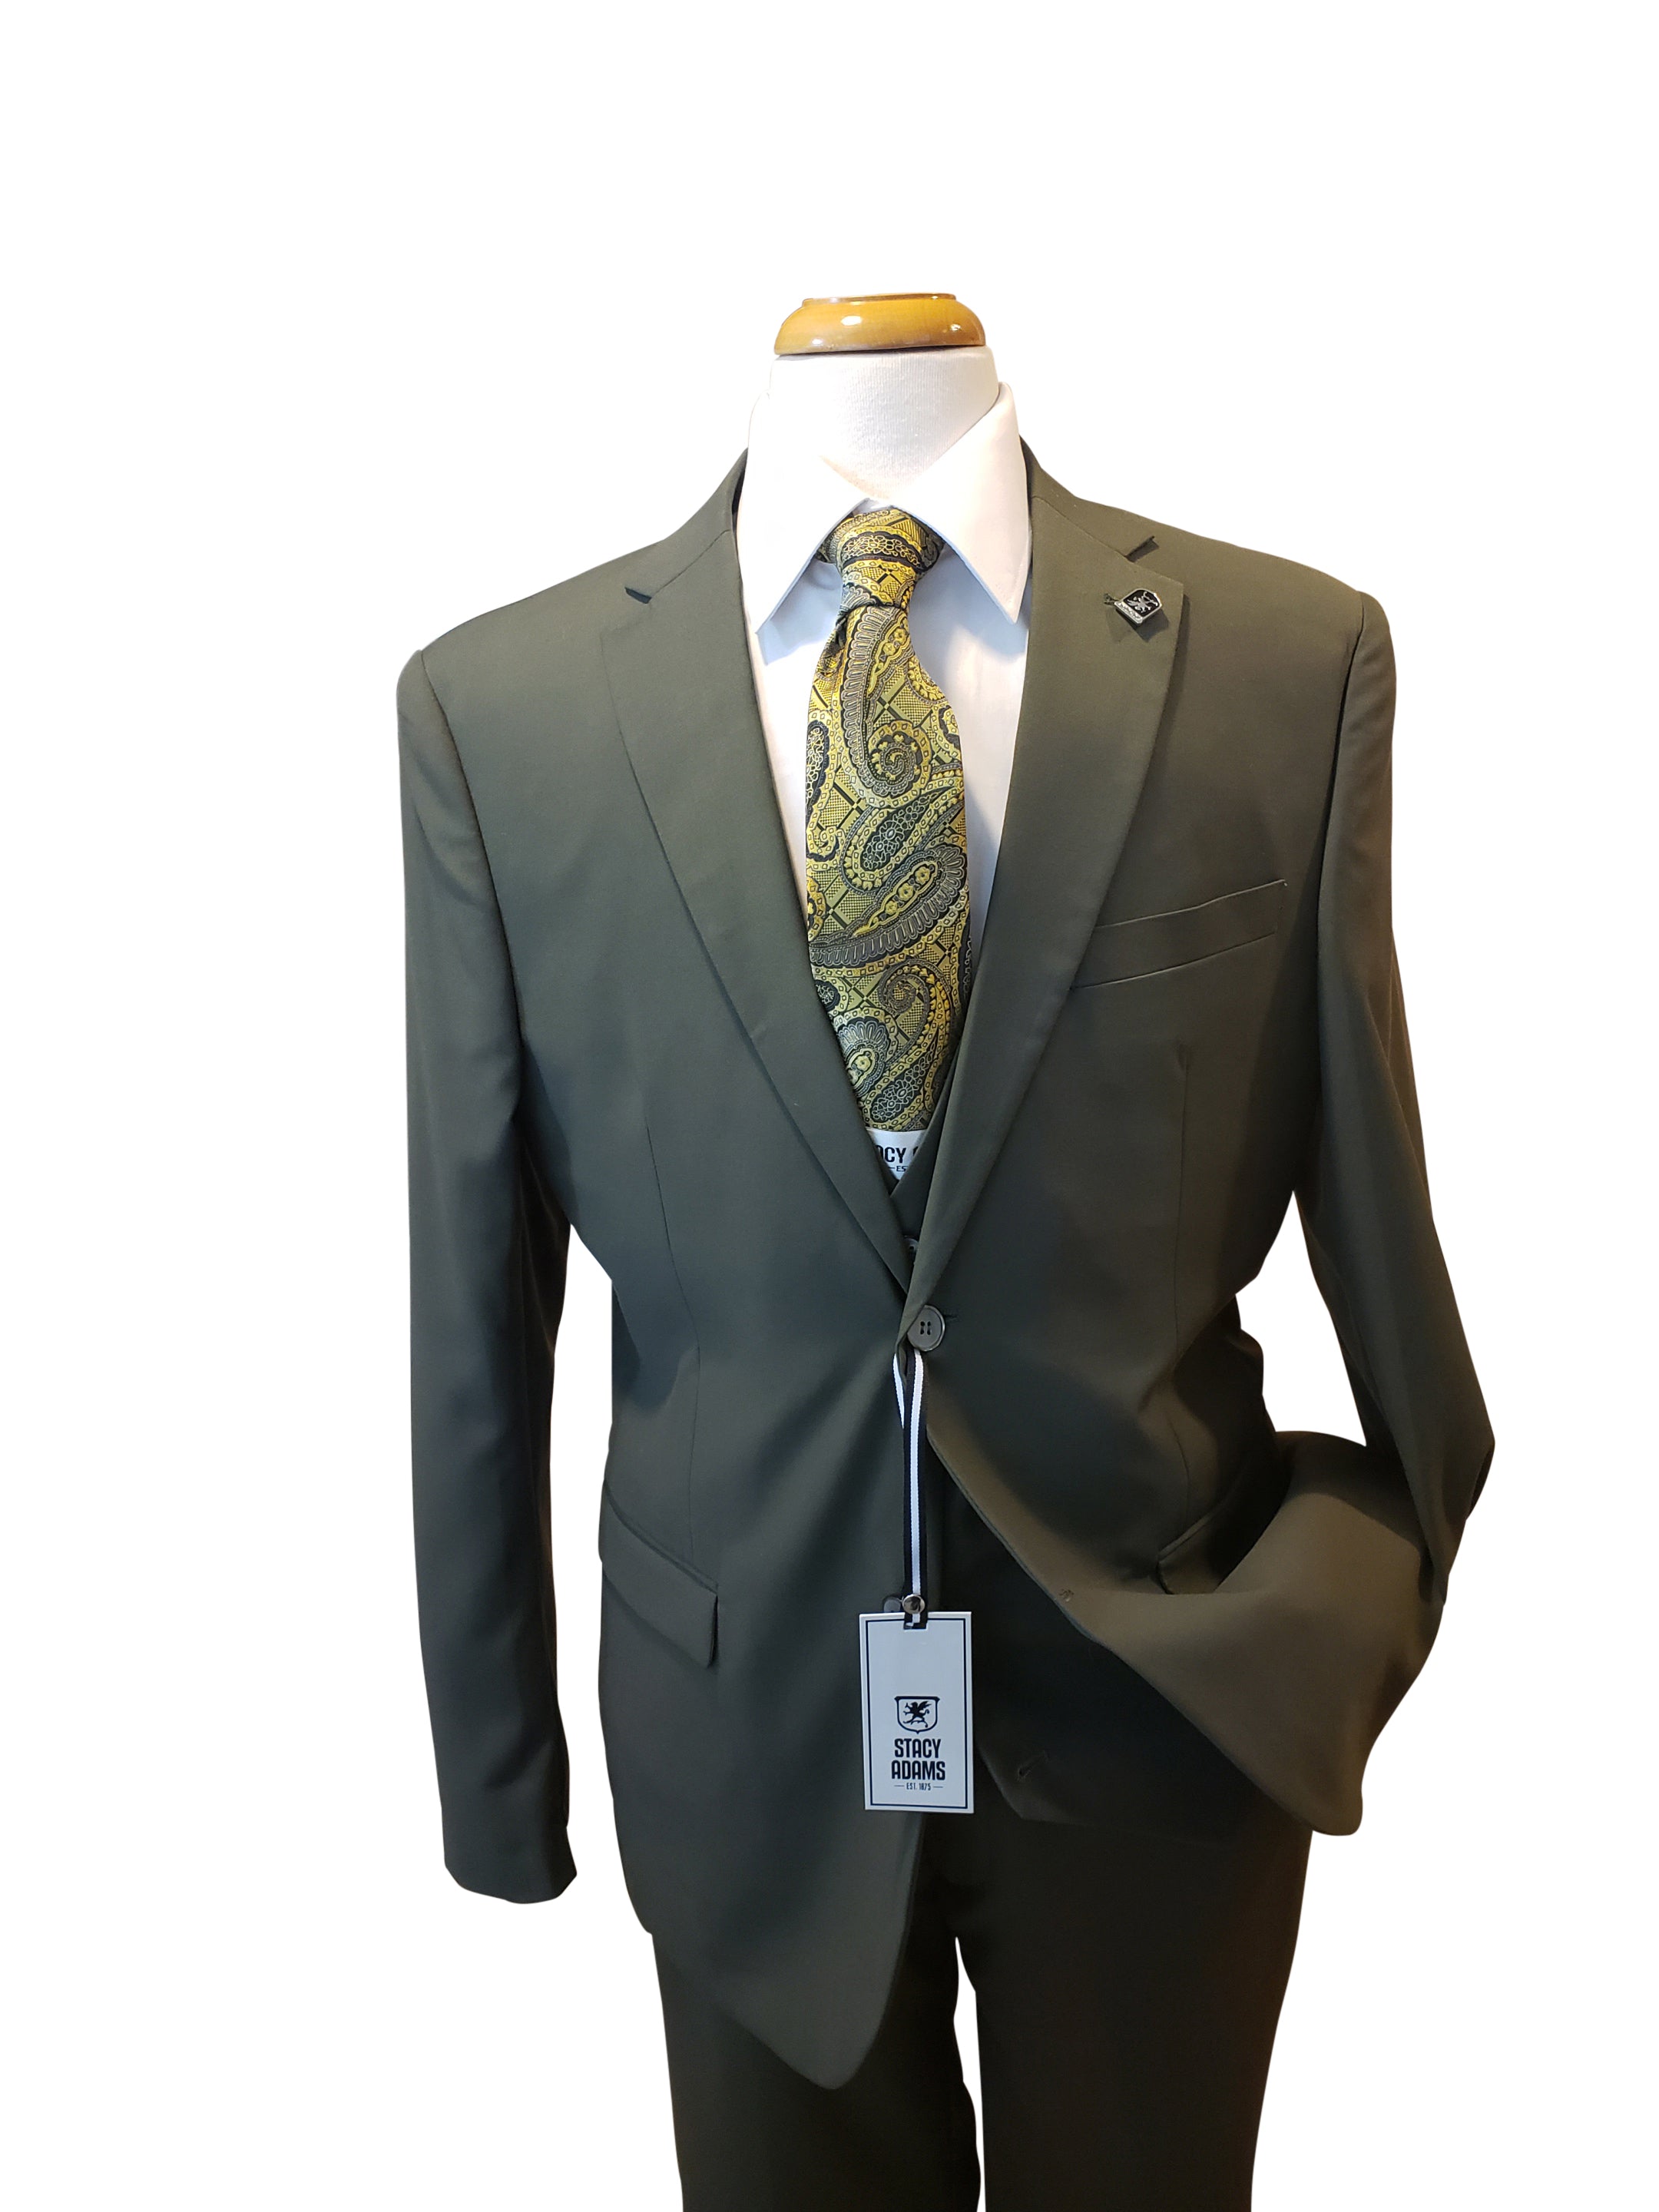 Olive Green Stacy Adams suit